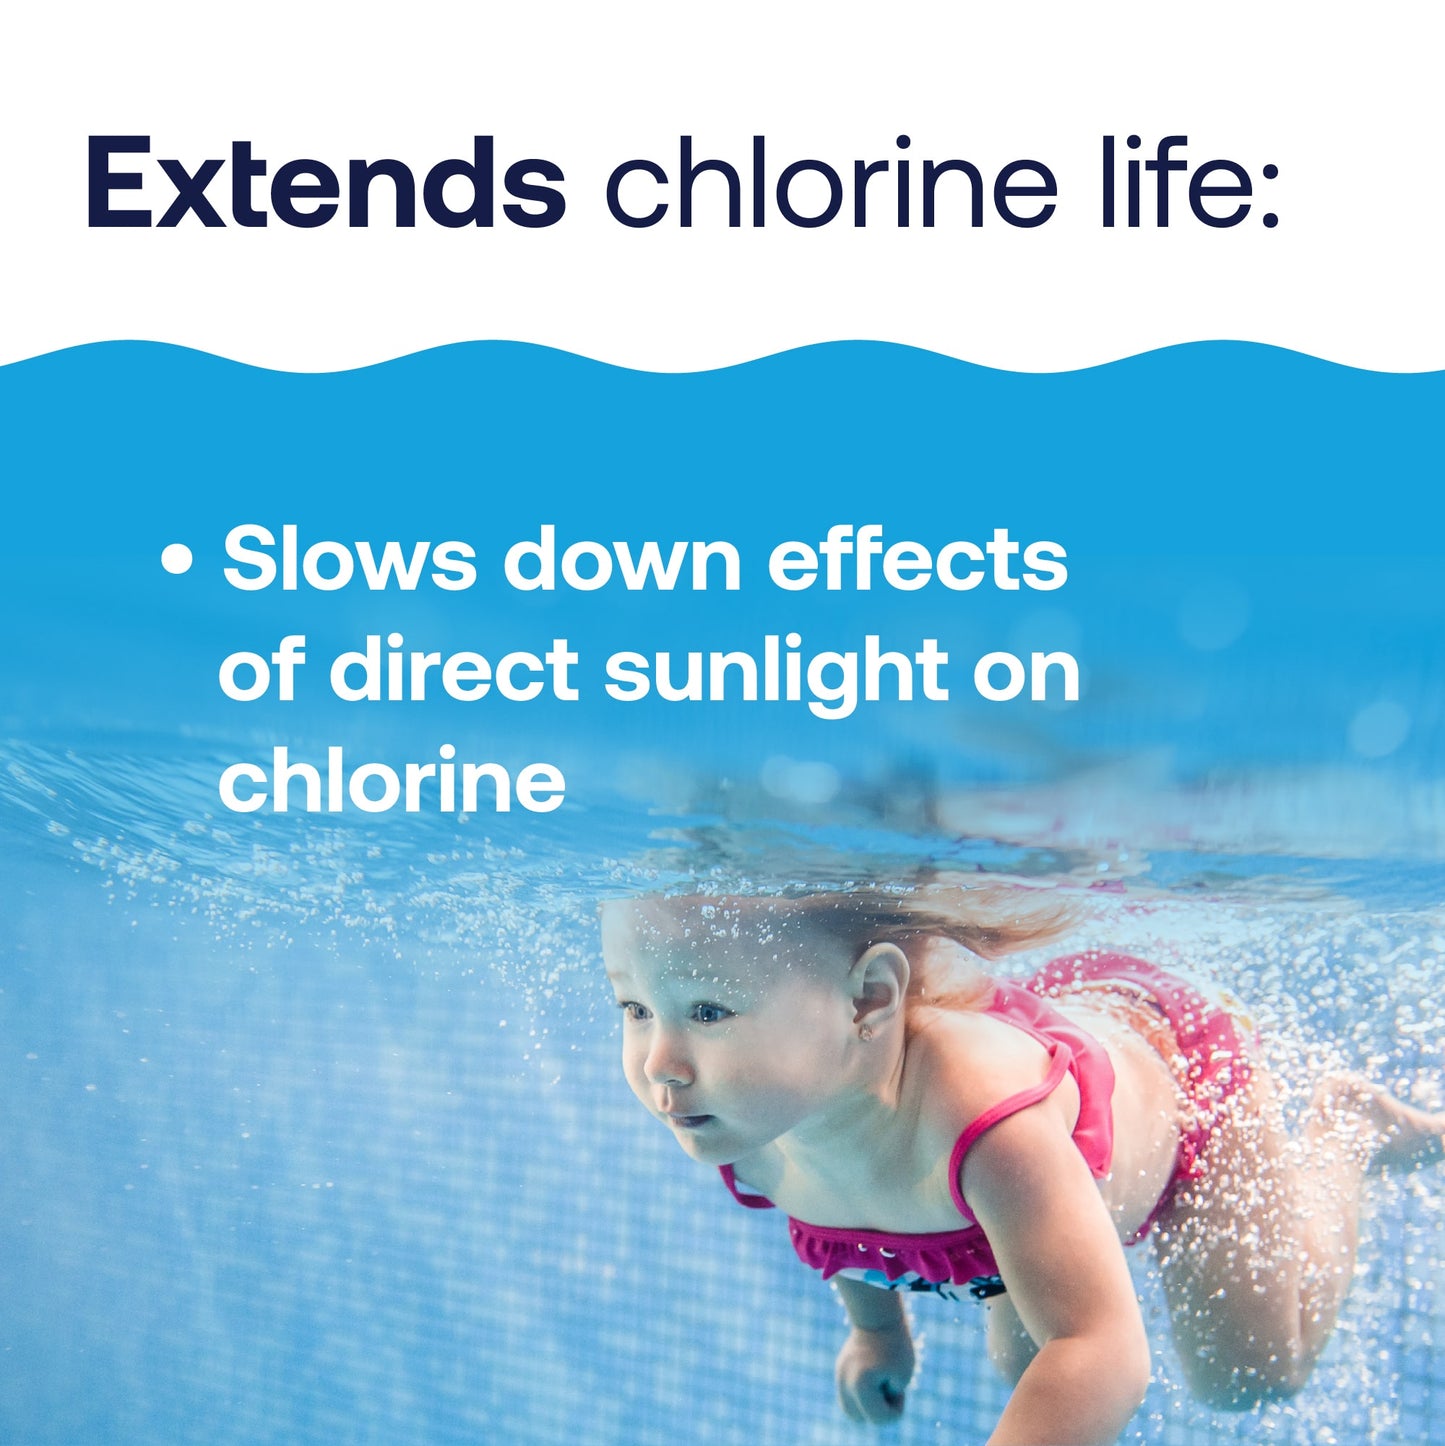 HTH™ Pool Care Chlorine Stabilizer